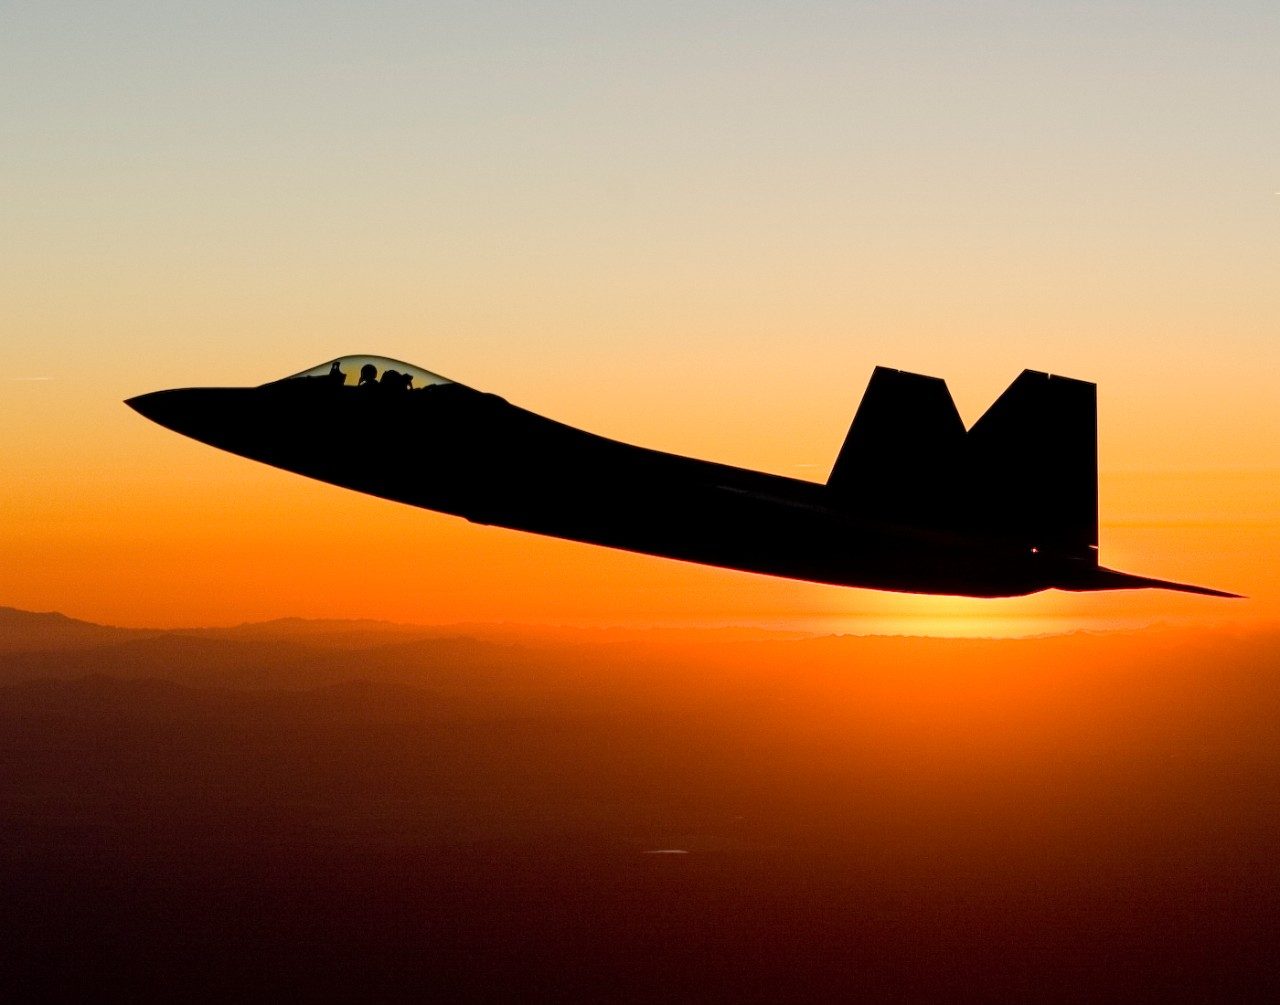 Raptor f-22 This is